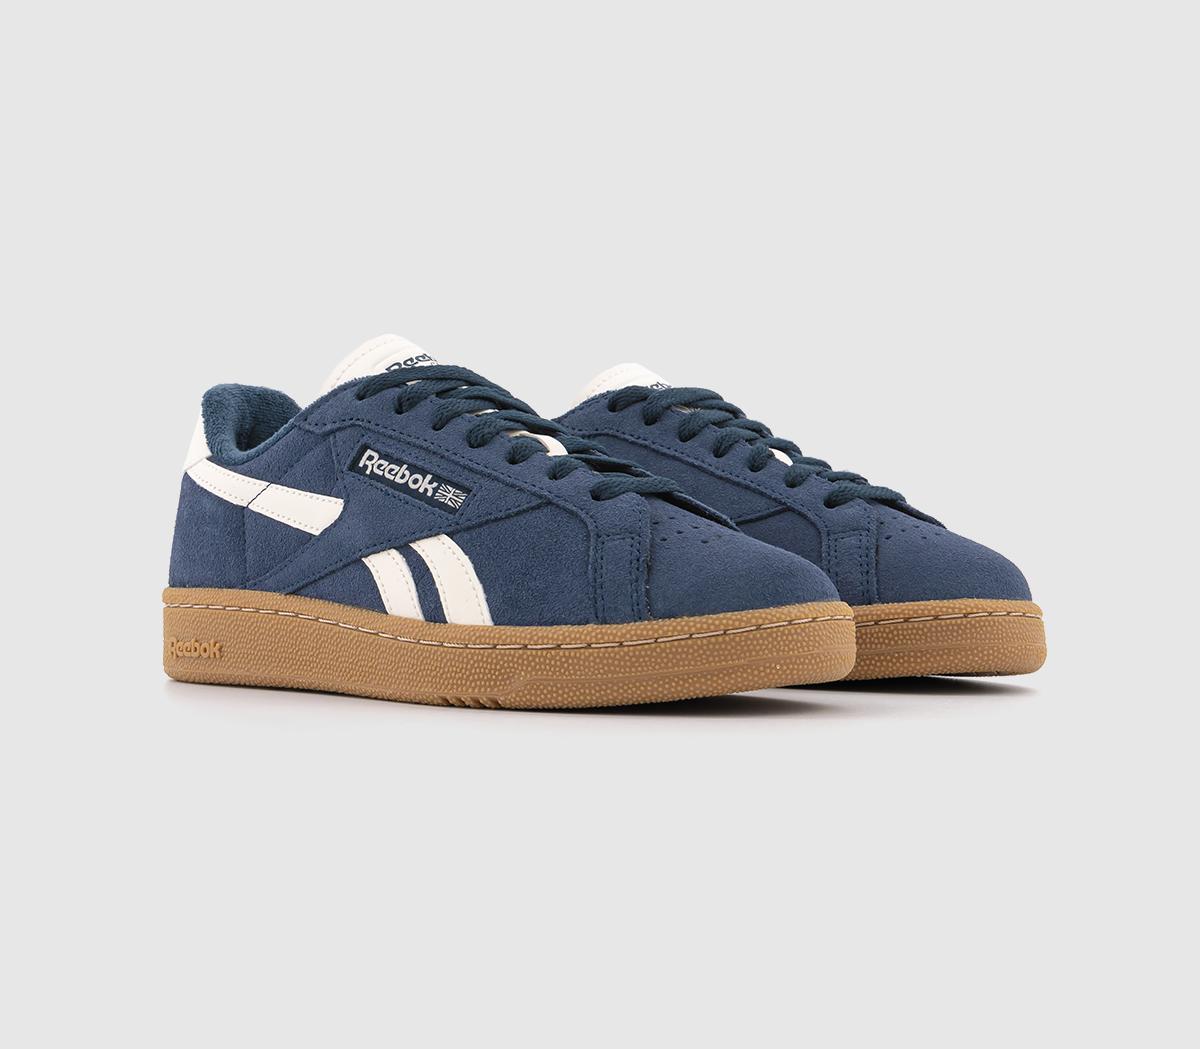 Reebok Womens Club C Grounds Trainers Vector Navy Blue, 5